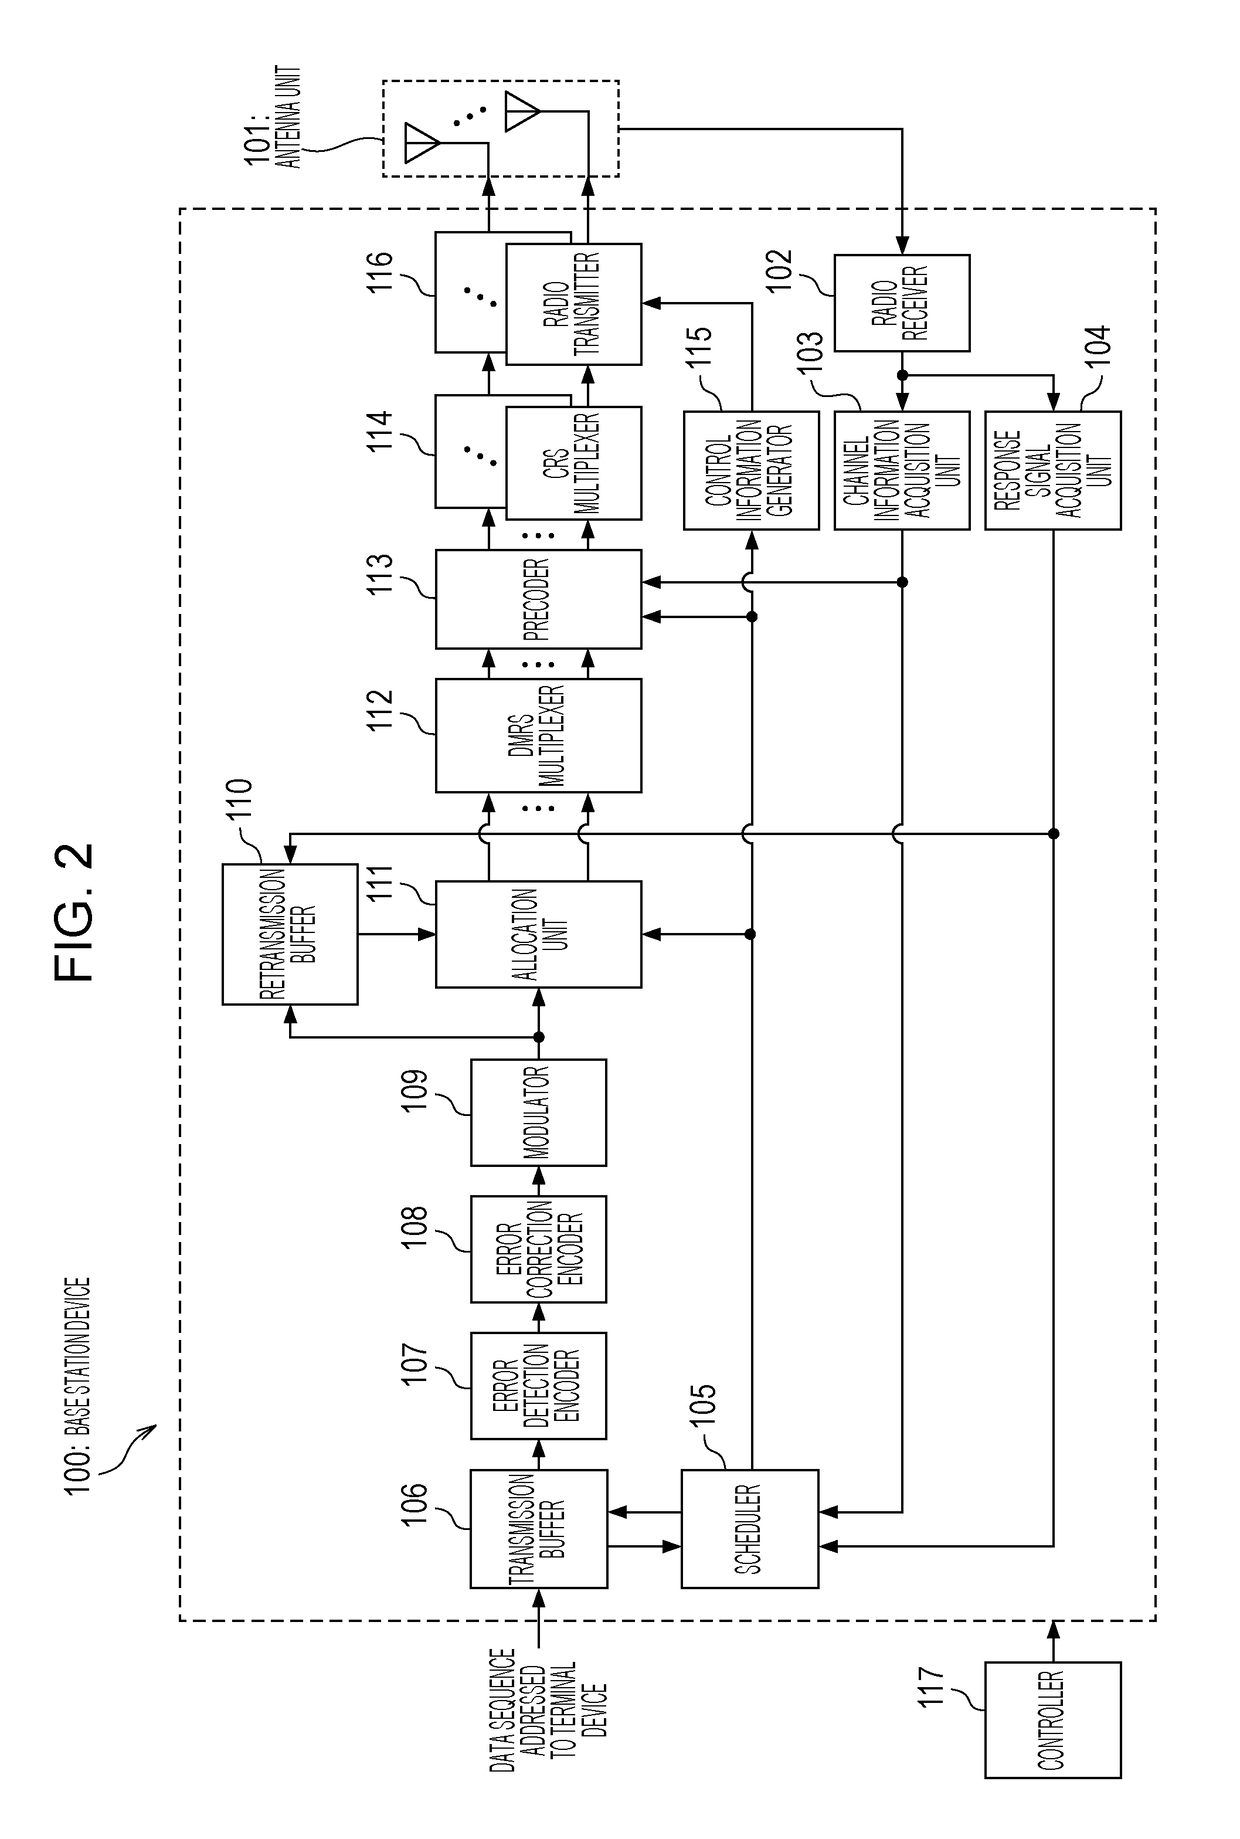 Transmission device that performs multi-user MIMO transmission for performing spatial multiplexing and transmitting of a plurality of packets addressed to a plurality of reception devices